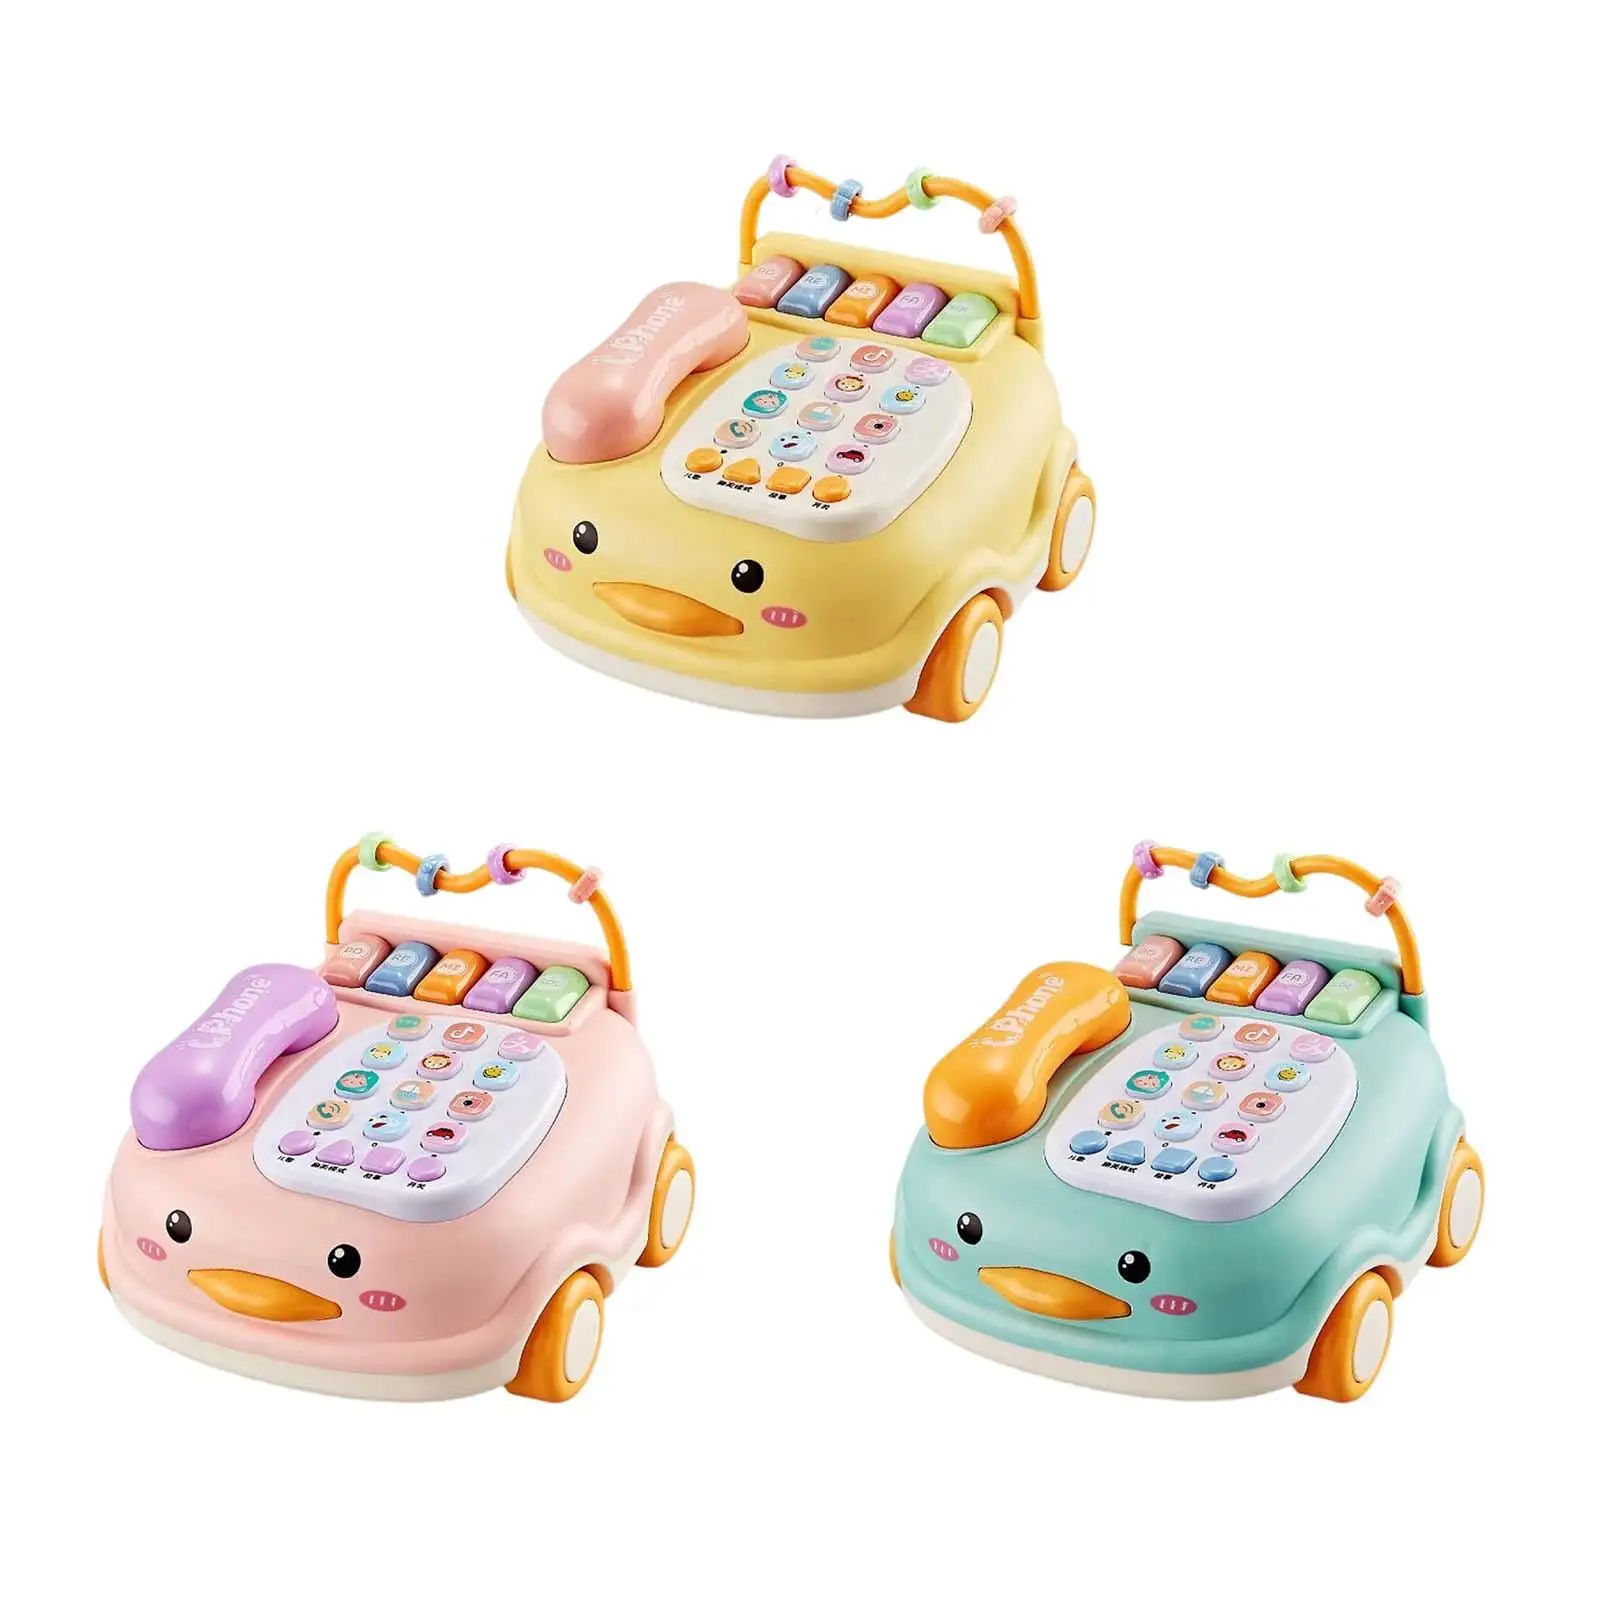 Montessori Toy Baby Musical Toy Early Learning Toy Baby Phone Toy for Creative Gift Early Education Gift Children 3 Years Old